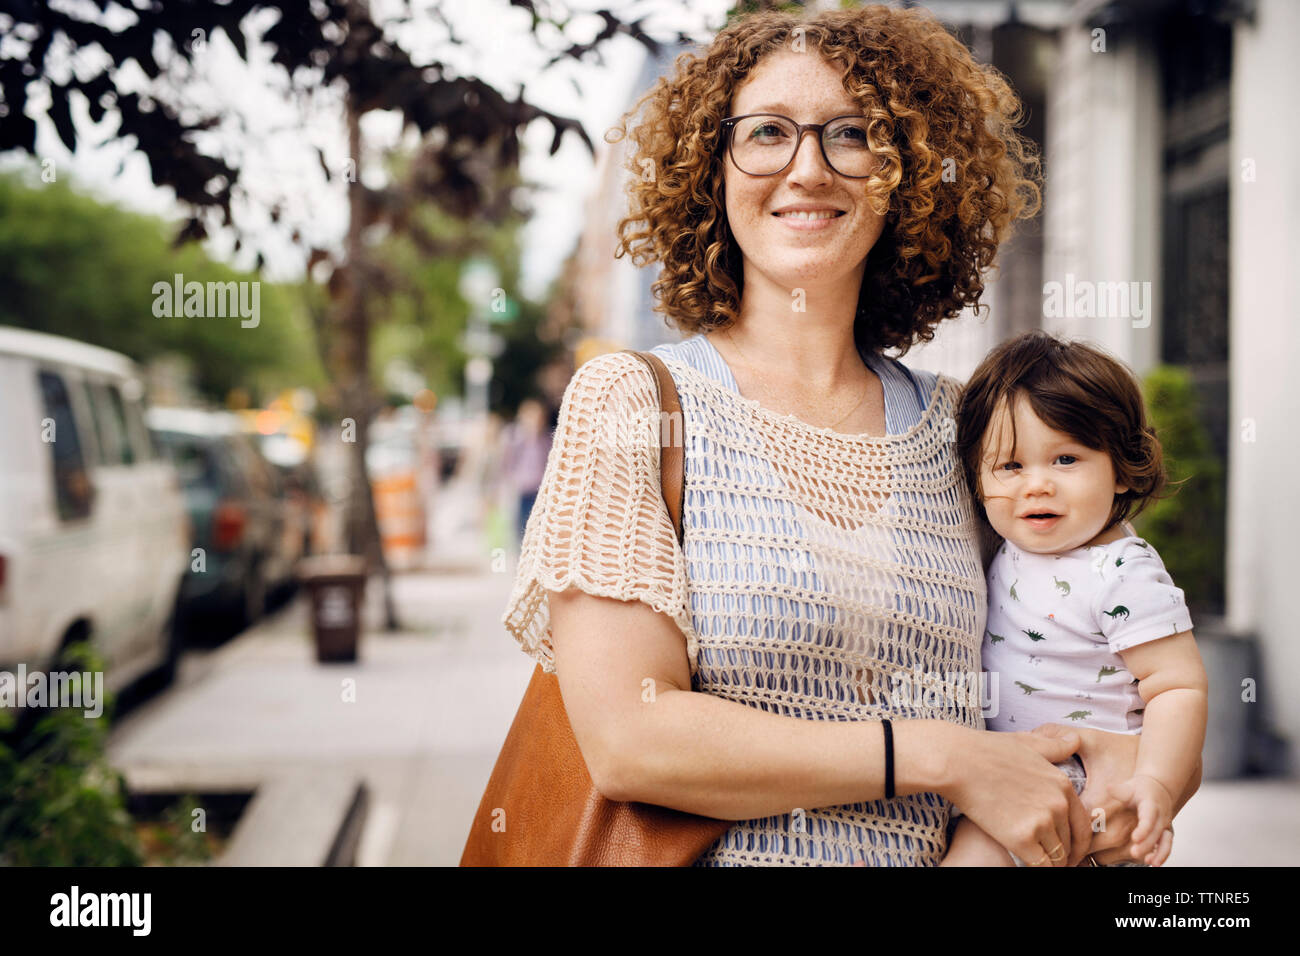 Portrait of smiling mother carrying baby boy while standing on footpath Stock Photo